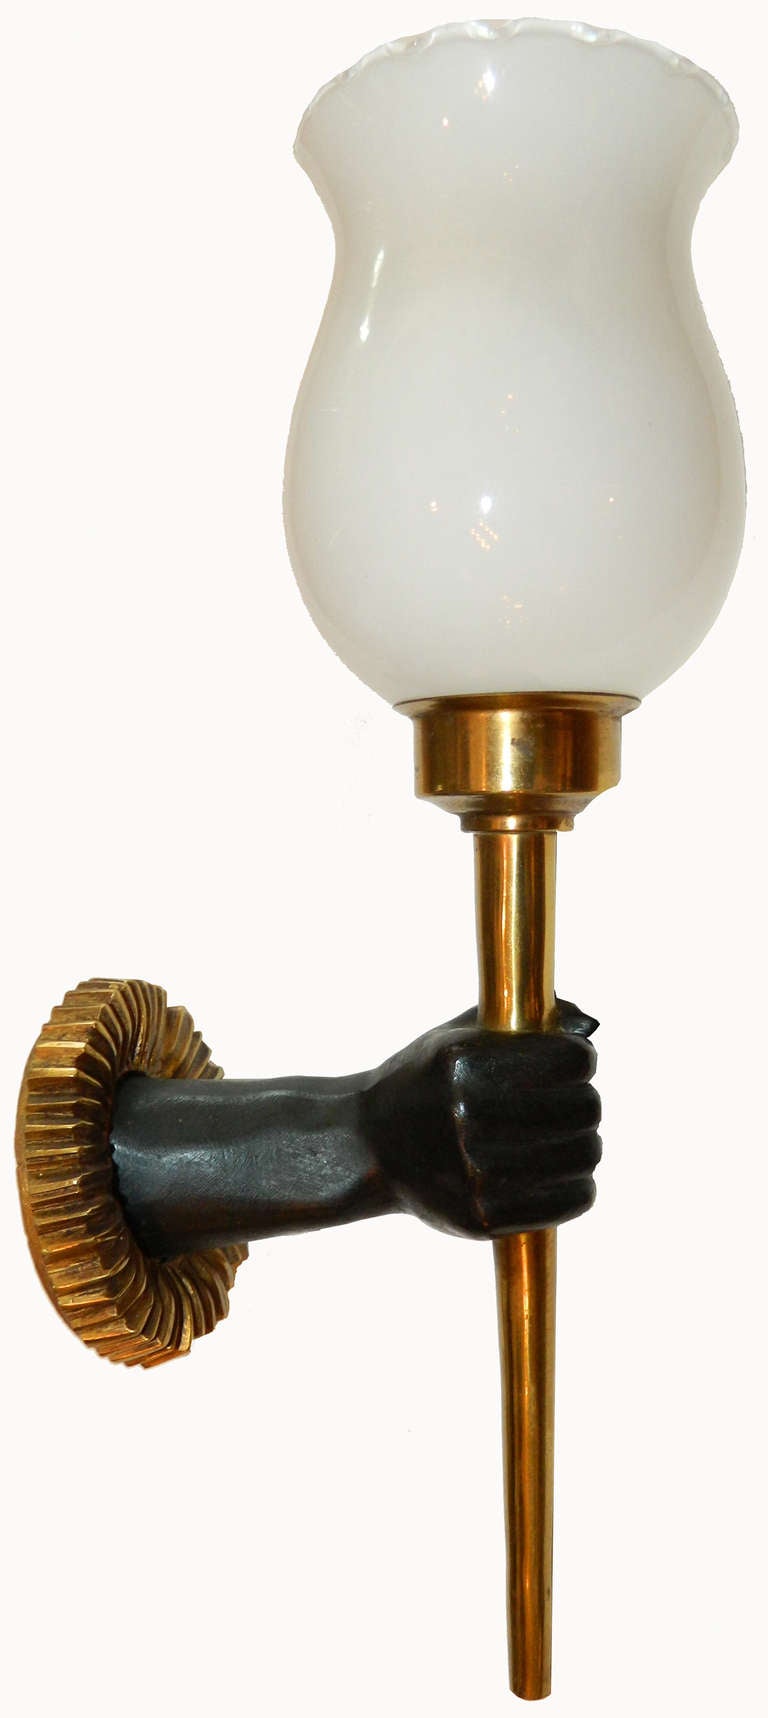 Pair of brass sconces handling a torch by John Devoluy.
60w each.
Provenance: Parisian hotel
US wired and in working condition.
Original patina
Have a look on our impressive collection of French and Italian midcentury period Sconces. More than 200